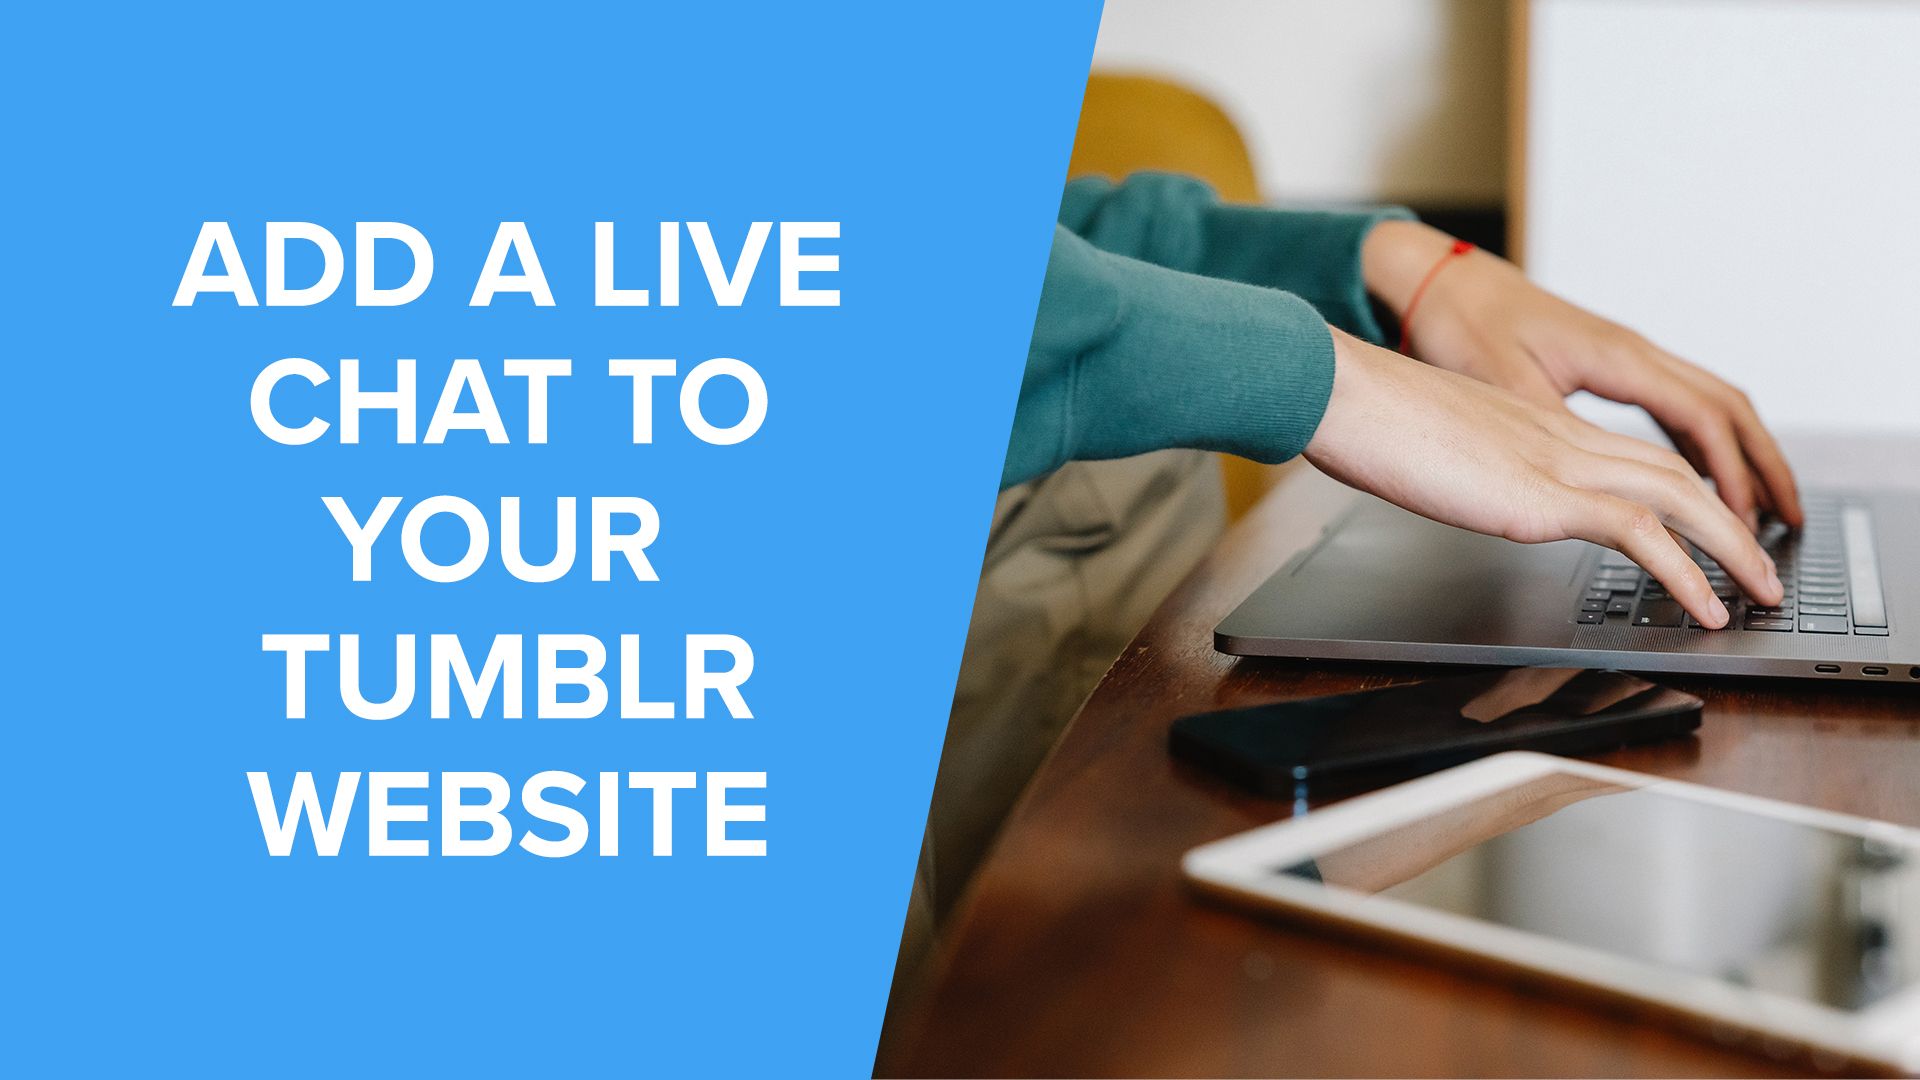 How to add a free live chat to your Tumblr website